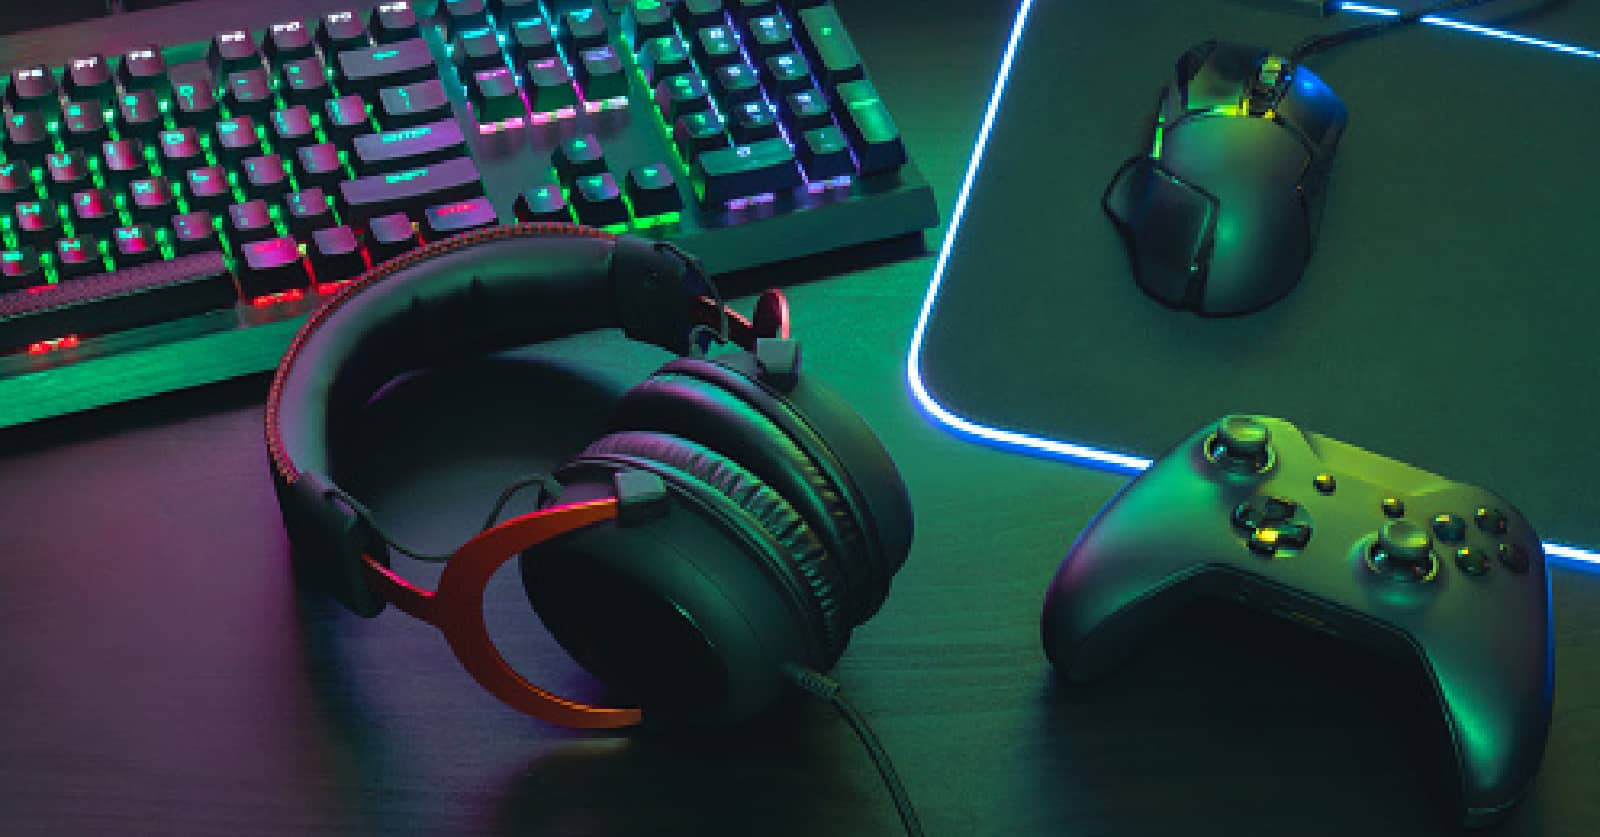 Prime Gaming: The Benefits, Features, and How It Works